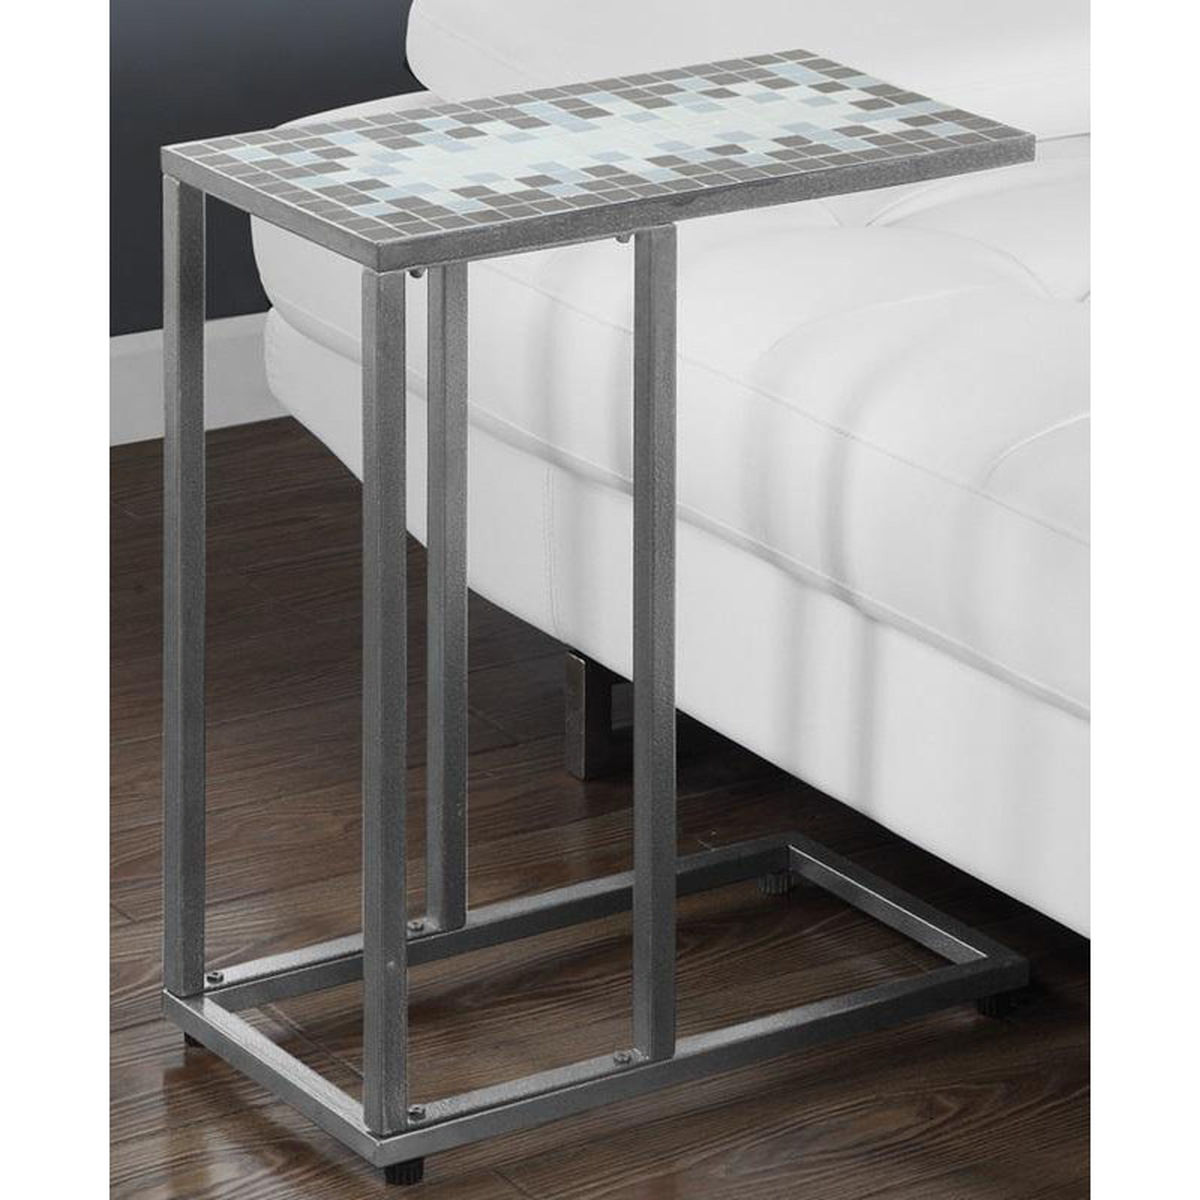 hammered metal accent table bizchair monarch specialties msp main our slide under sofa with gray and blue console shelves drawers tablecloth umbrella hole tablette prix wood glass